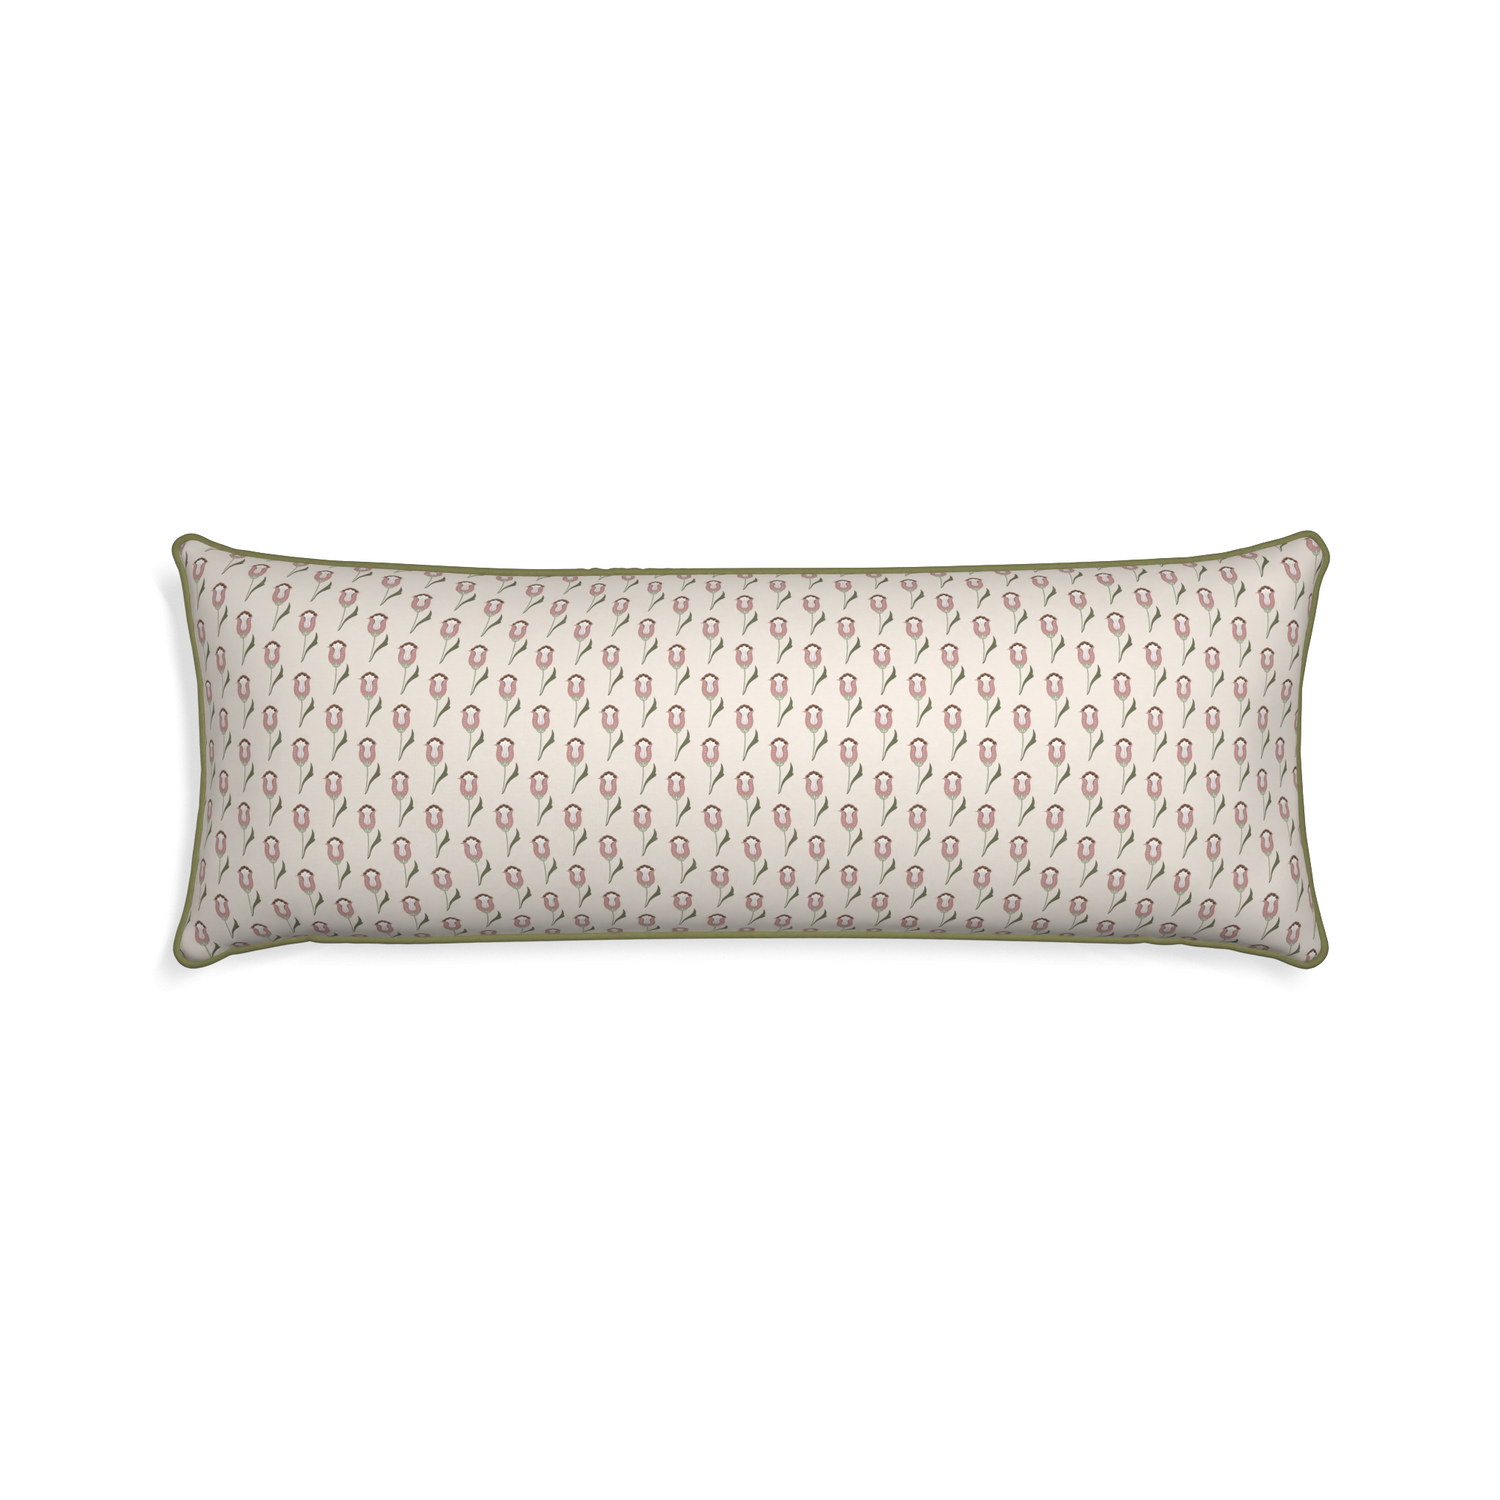 rectangle cream pillow with pink tulips and moss green piping